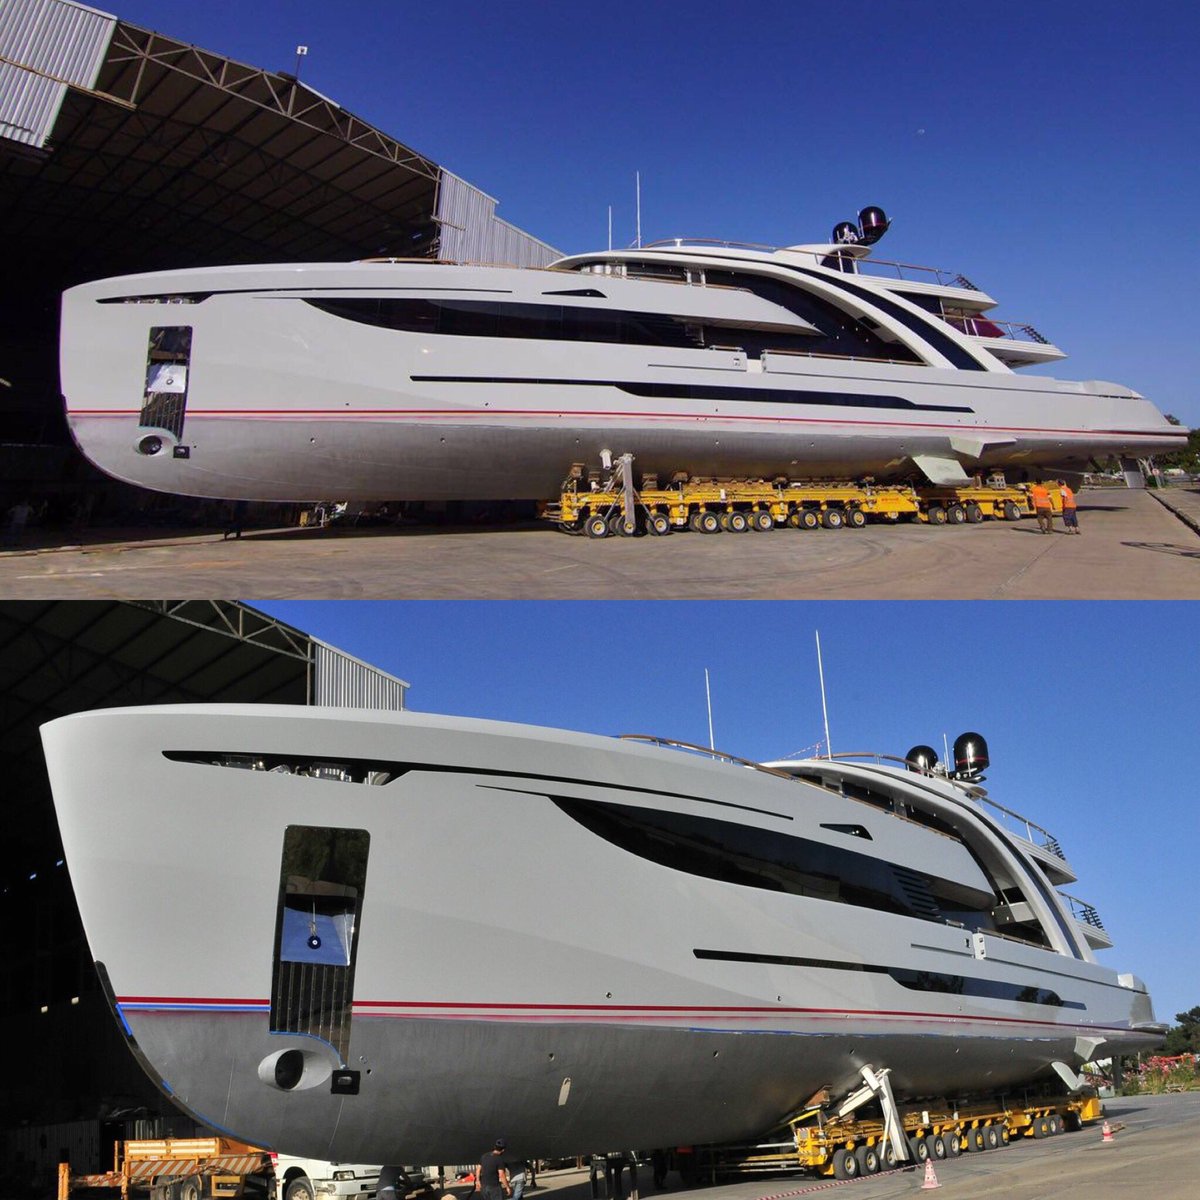 50m #KenFreivokh design built by #MayraYachts #Antalya getting ready to launch
See more --> instagram.com/p/BFeh3BJQUwN/